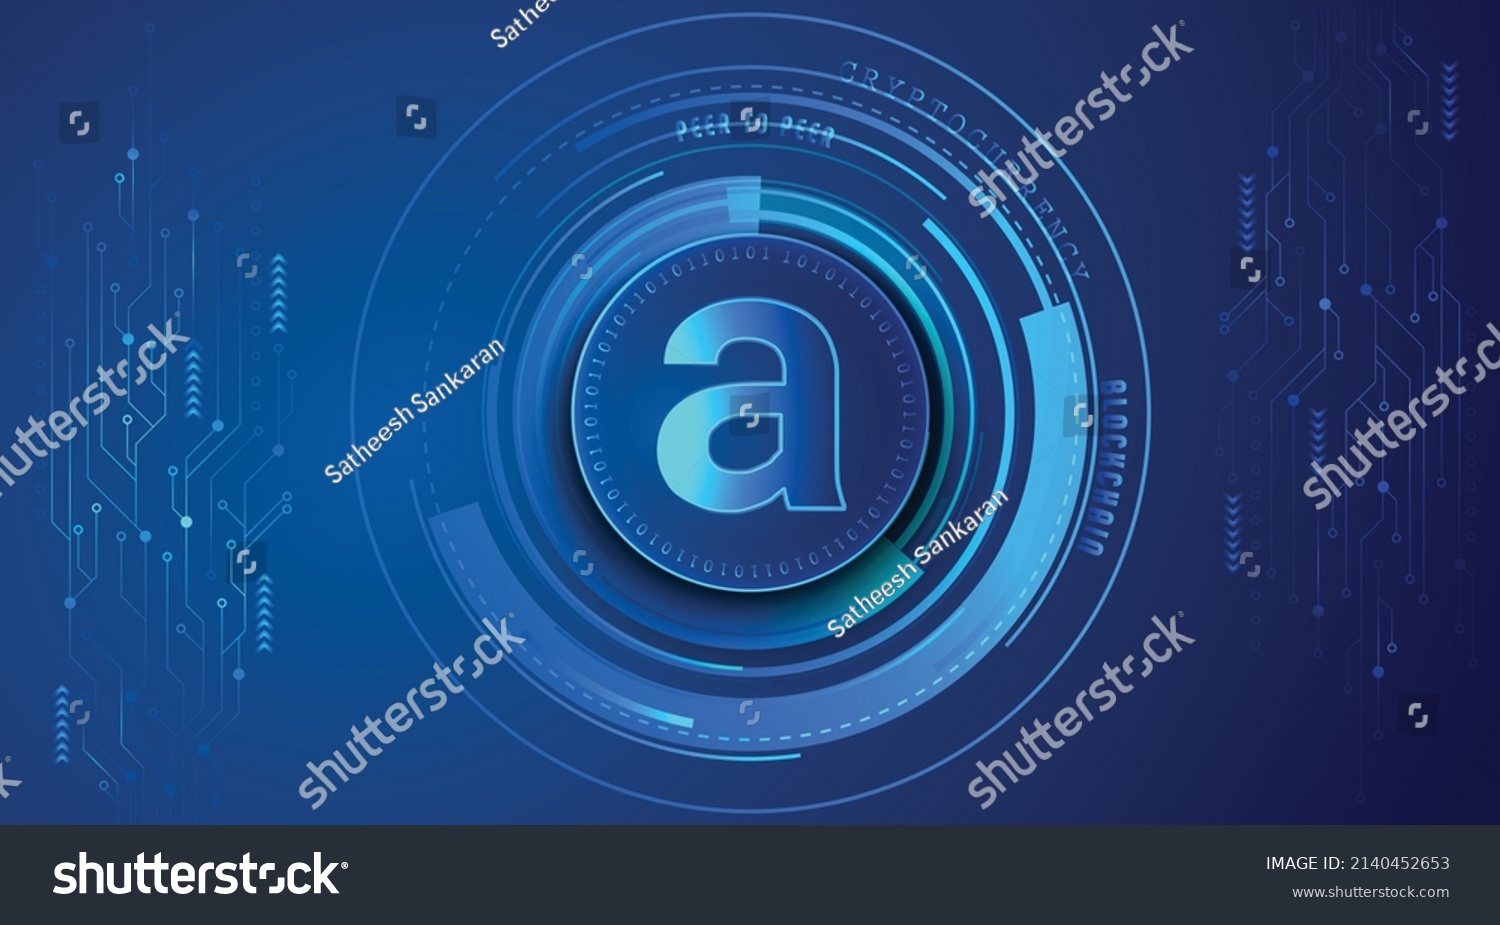 SVG of Arweave (AR) block chain crypto currency digital encryption, virtual money exchange. Technology global network vector illustration background and banner design template. Futuristic web trading svg